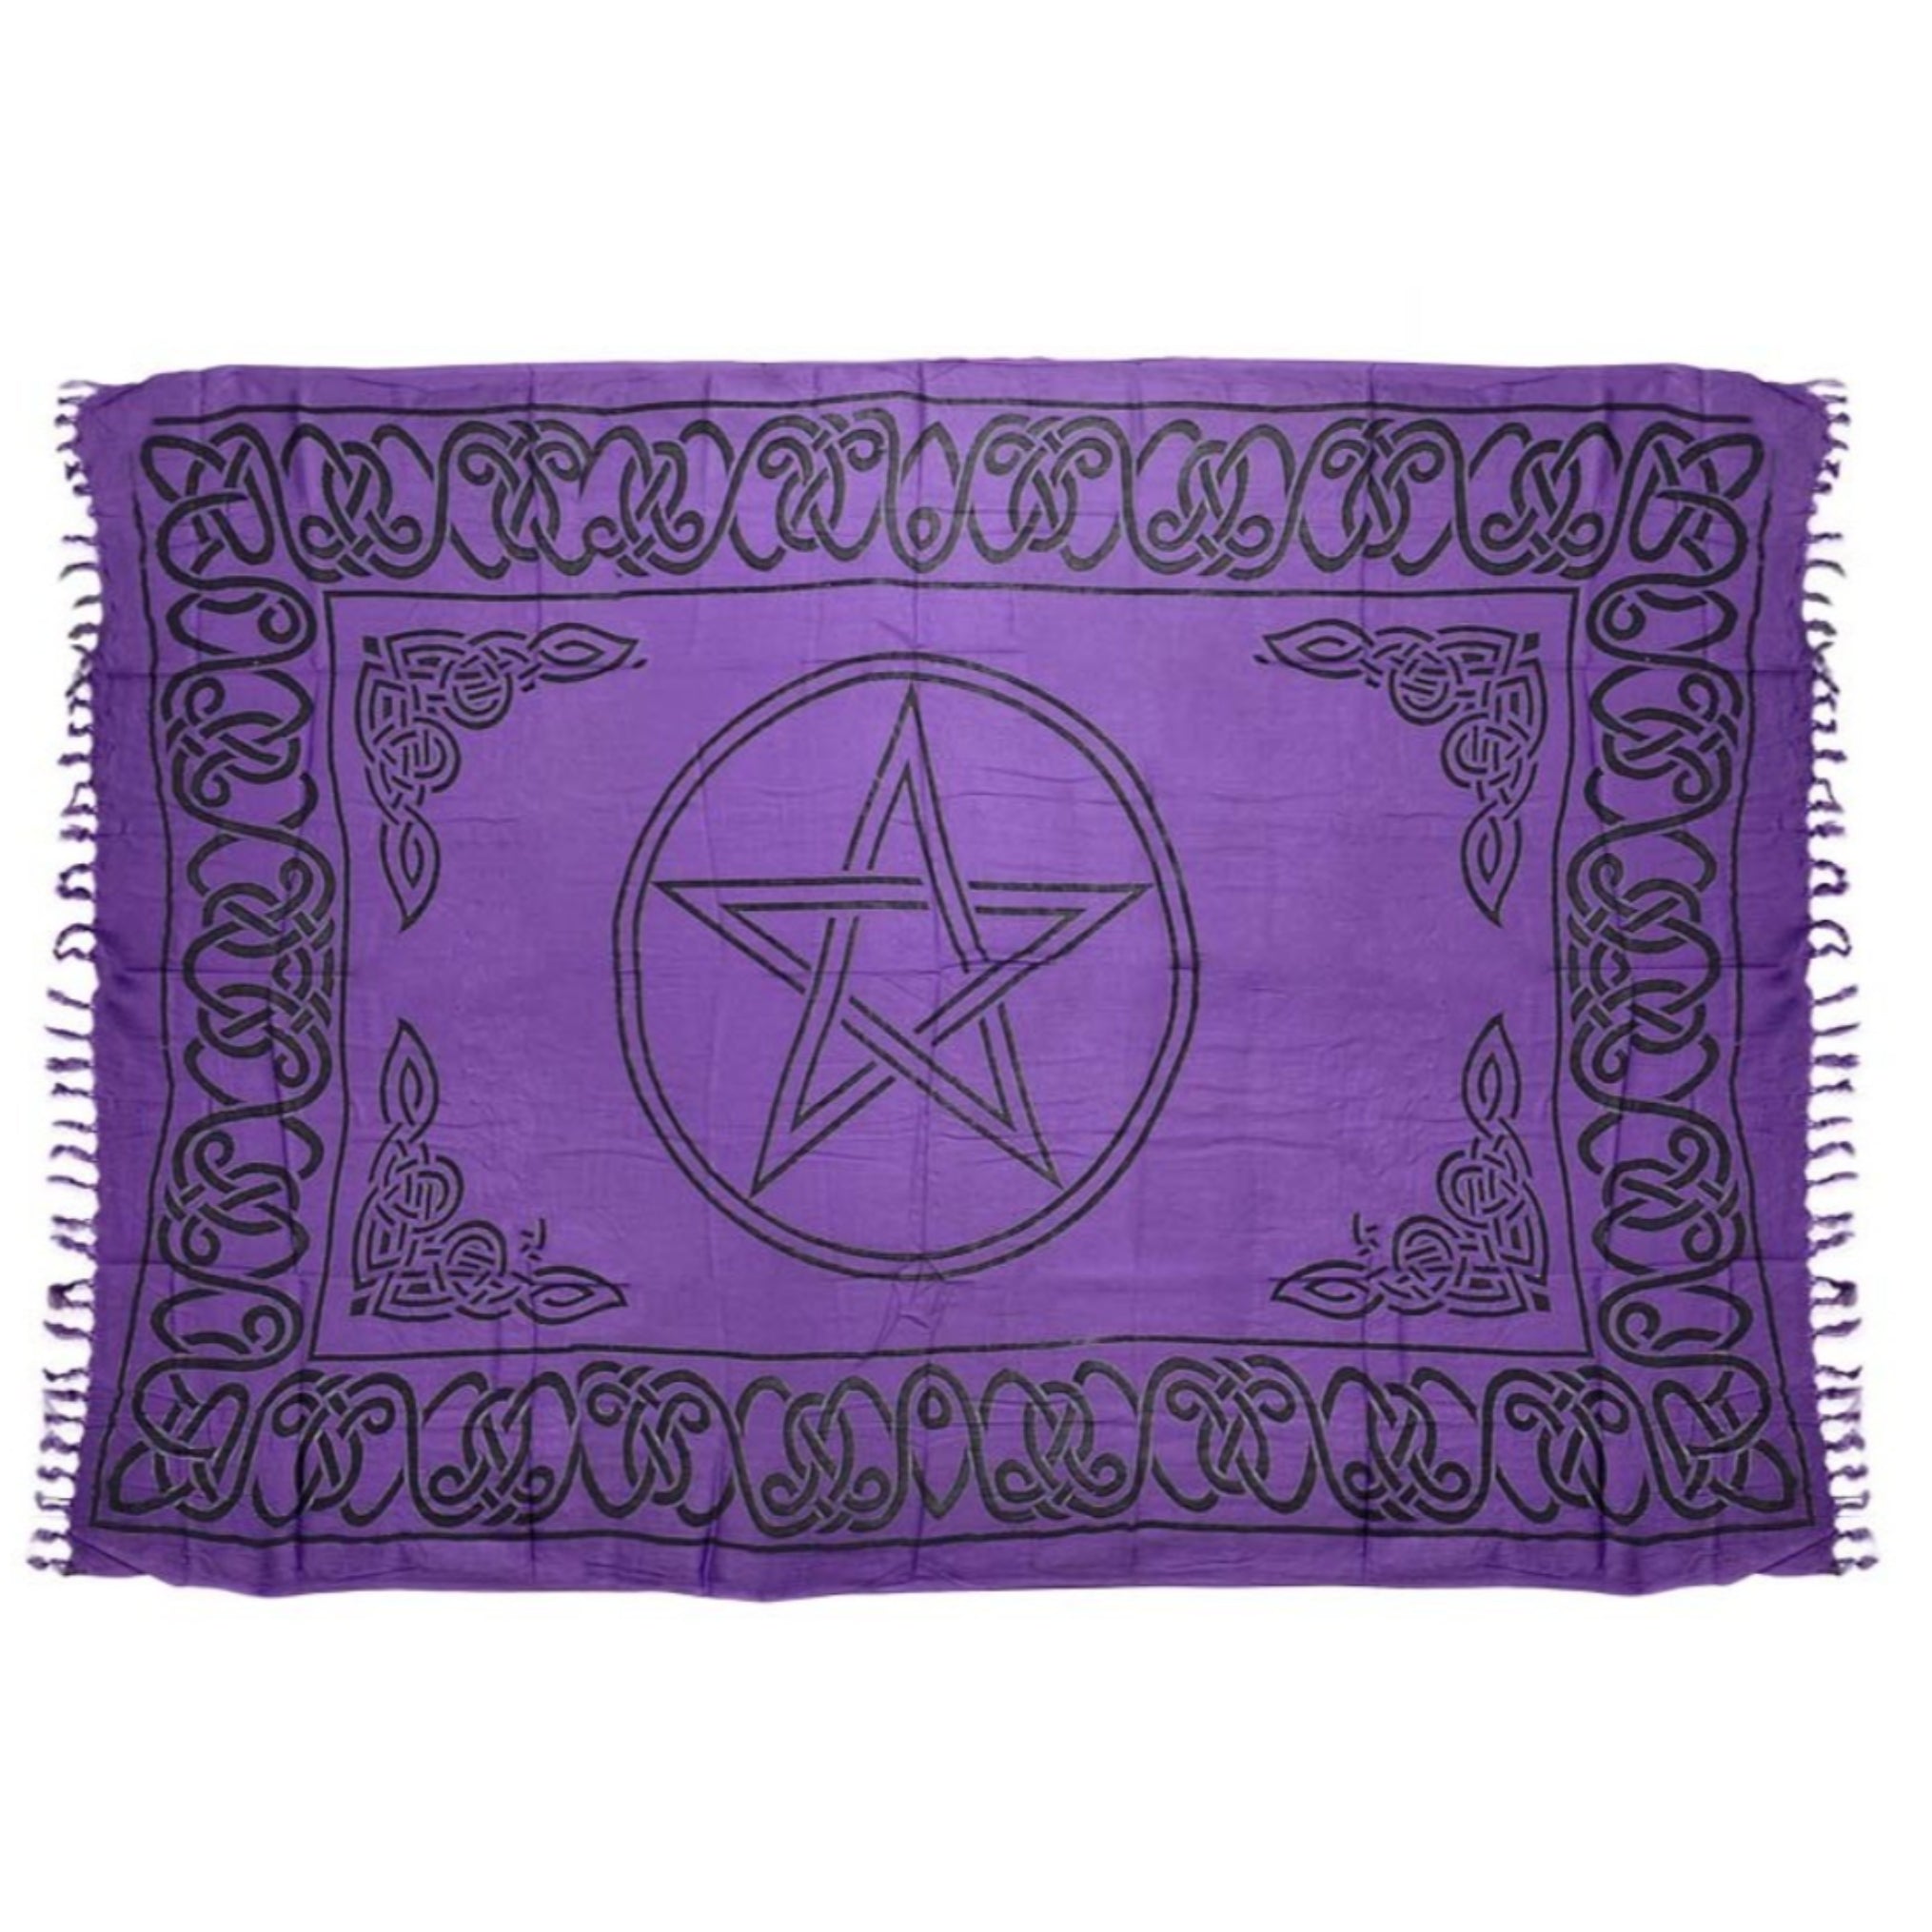 Pentacle Altar Cloth 72 inch - 13 Moons